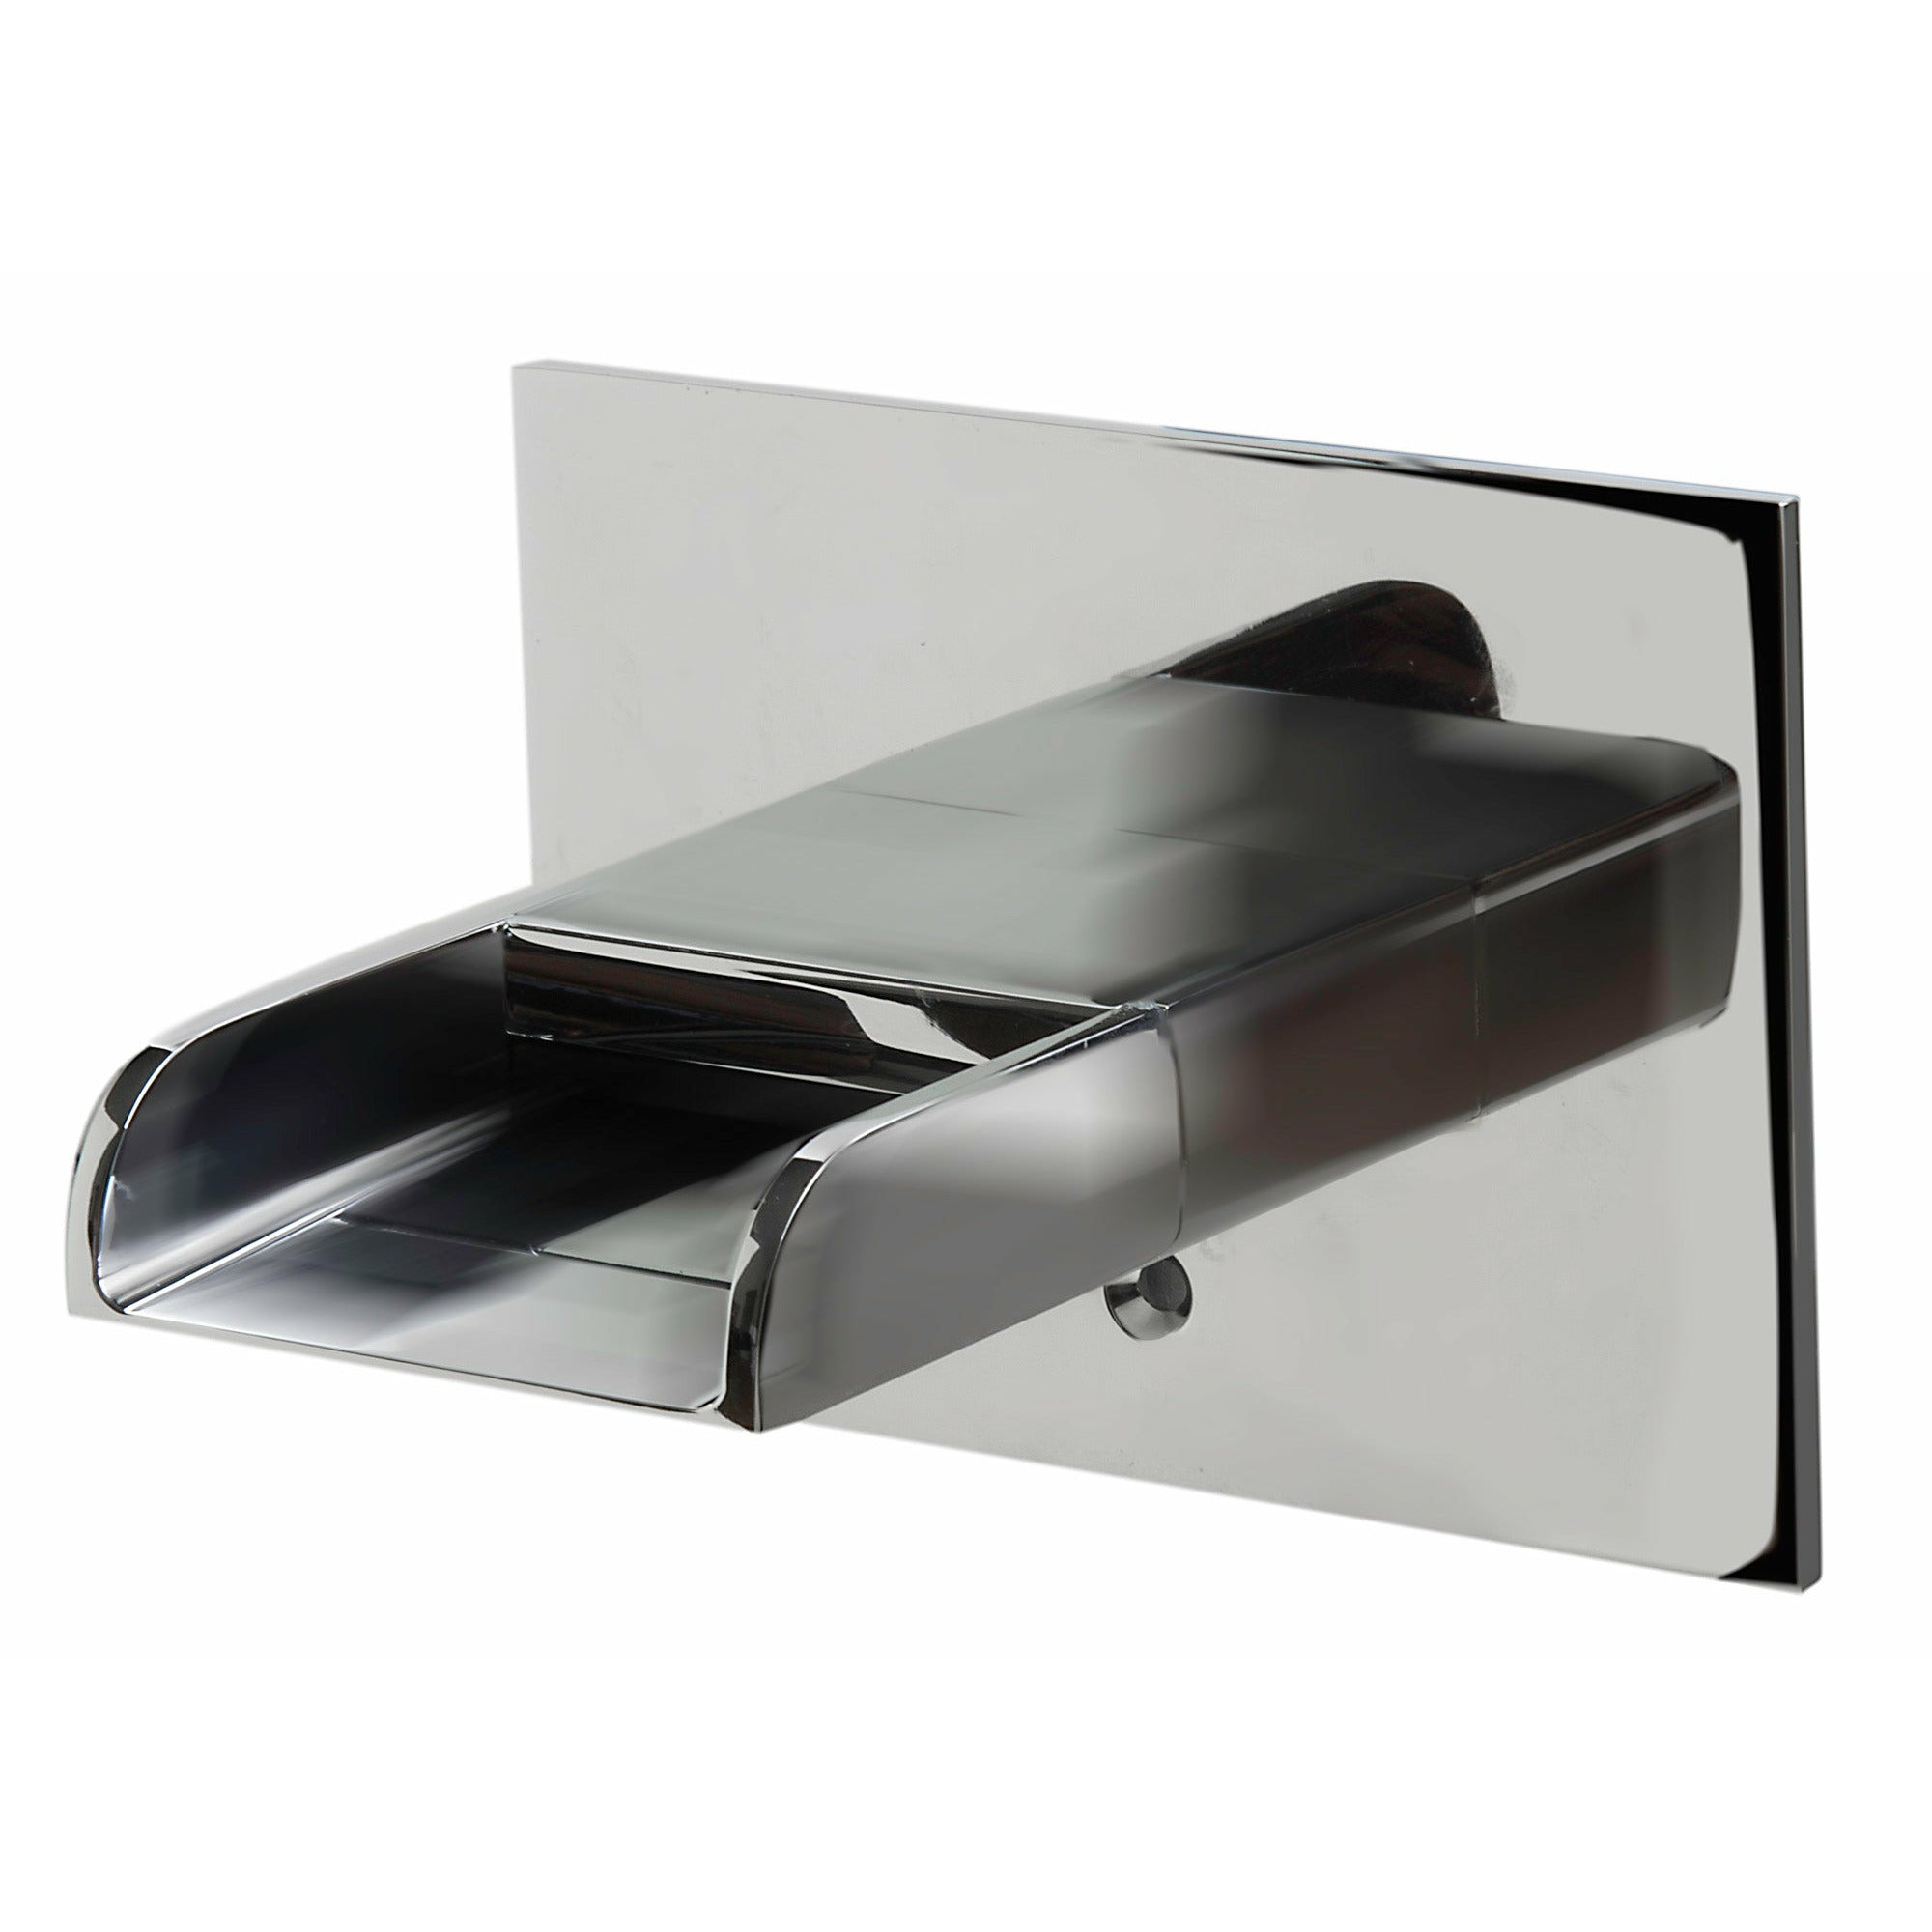 ALFI AB5901 Waterfall Tub Filler brushed nickel, wall mounted in a white background